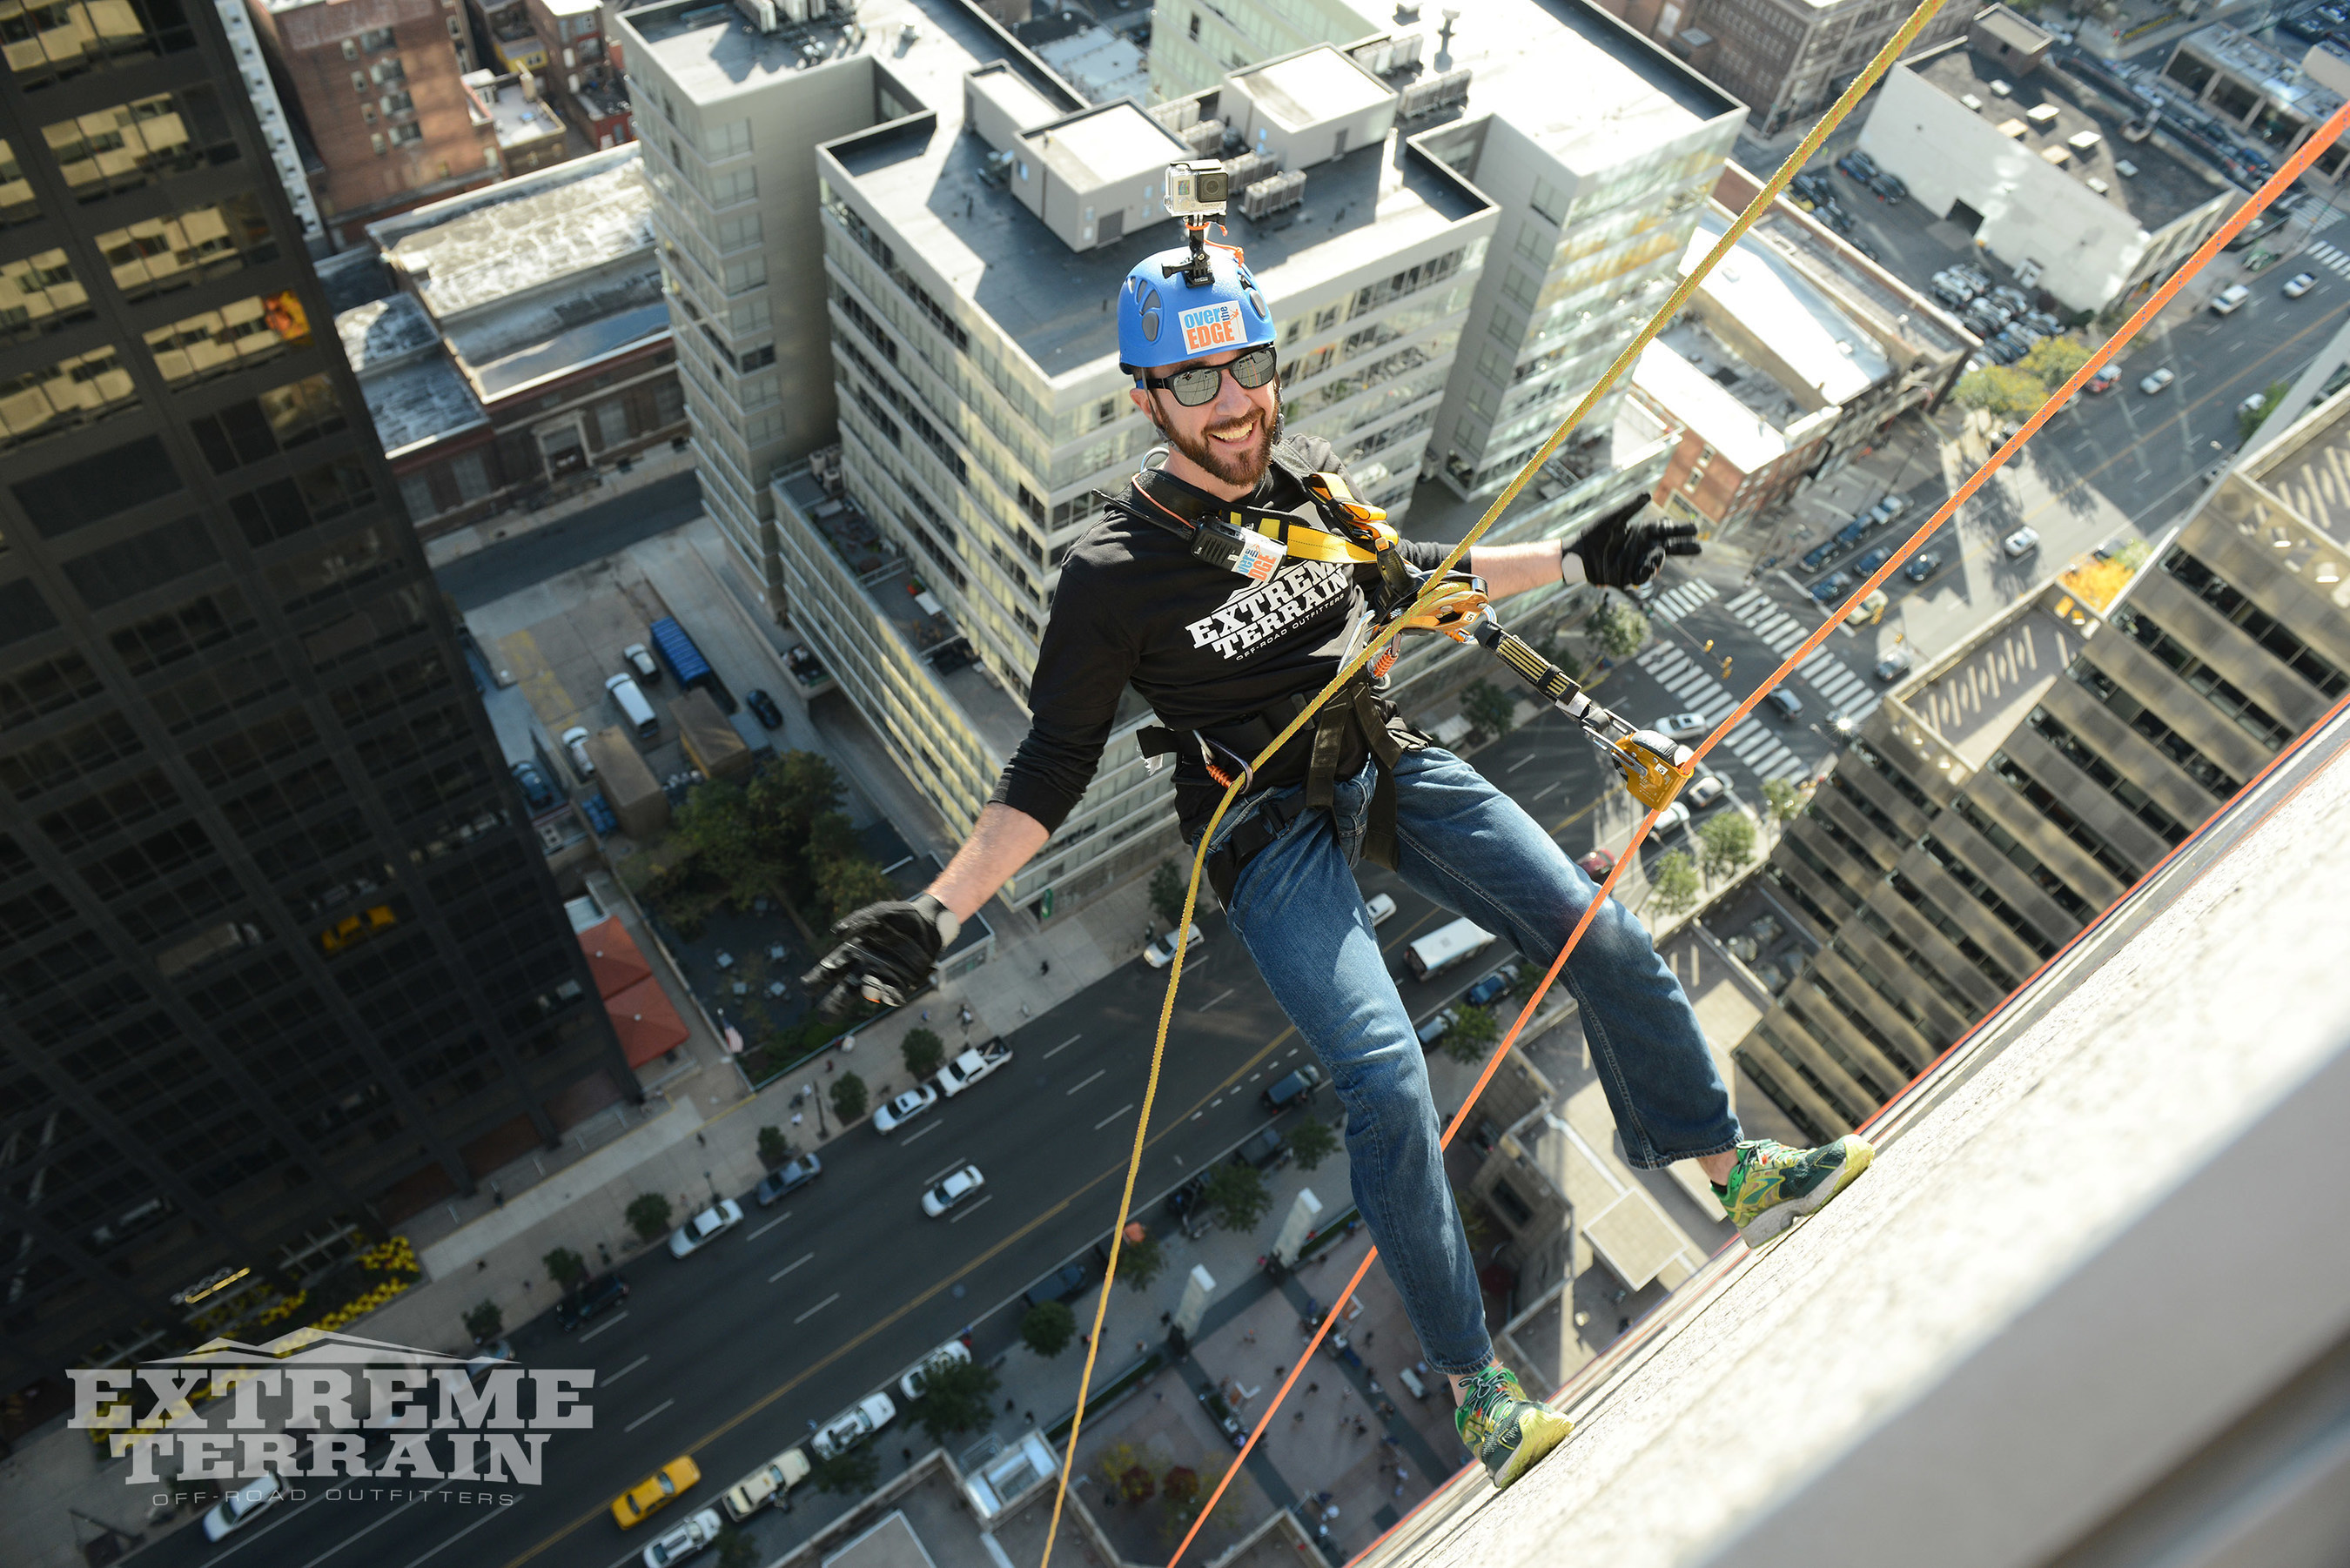 ExtremeTerrain employee Mike Cunningham was voted to rappel the 2 Commerce Square building by fellow employees who said he embodies one of XT's core values: Be Ambitious.